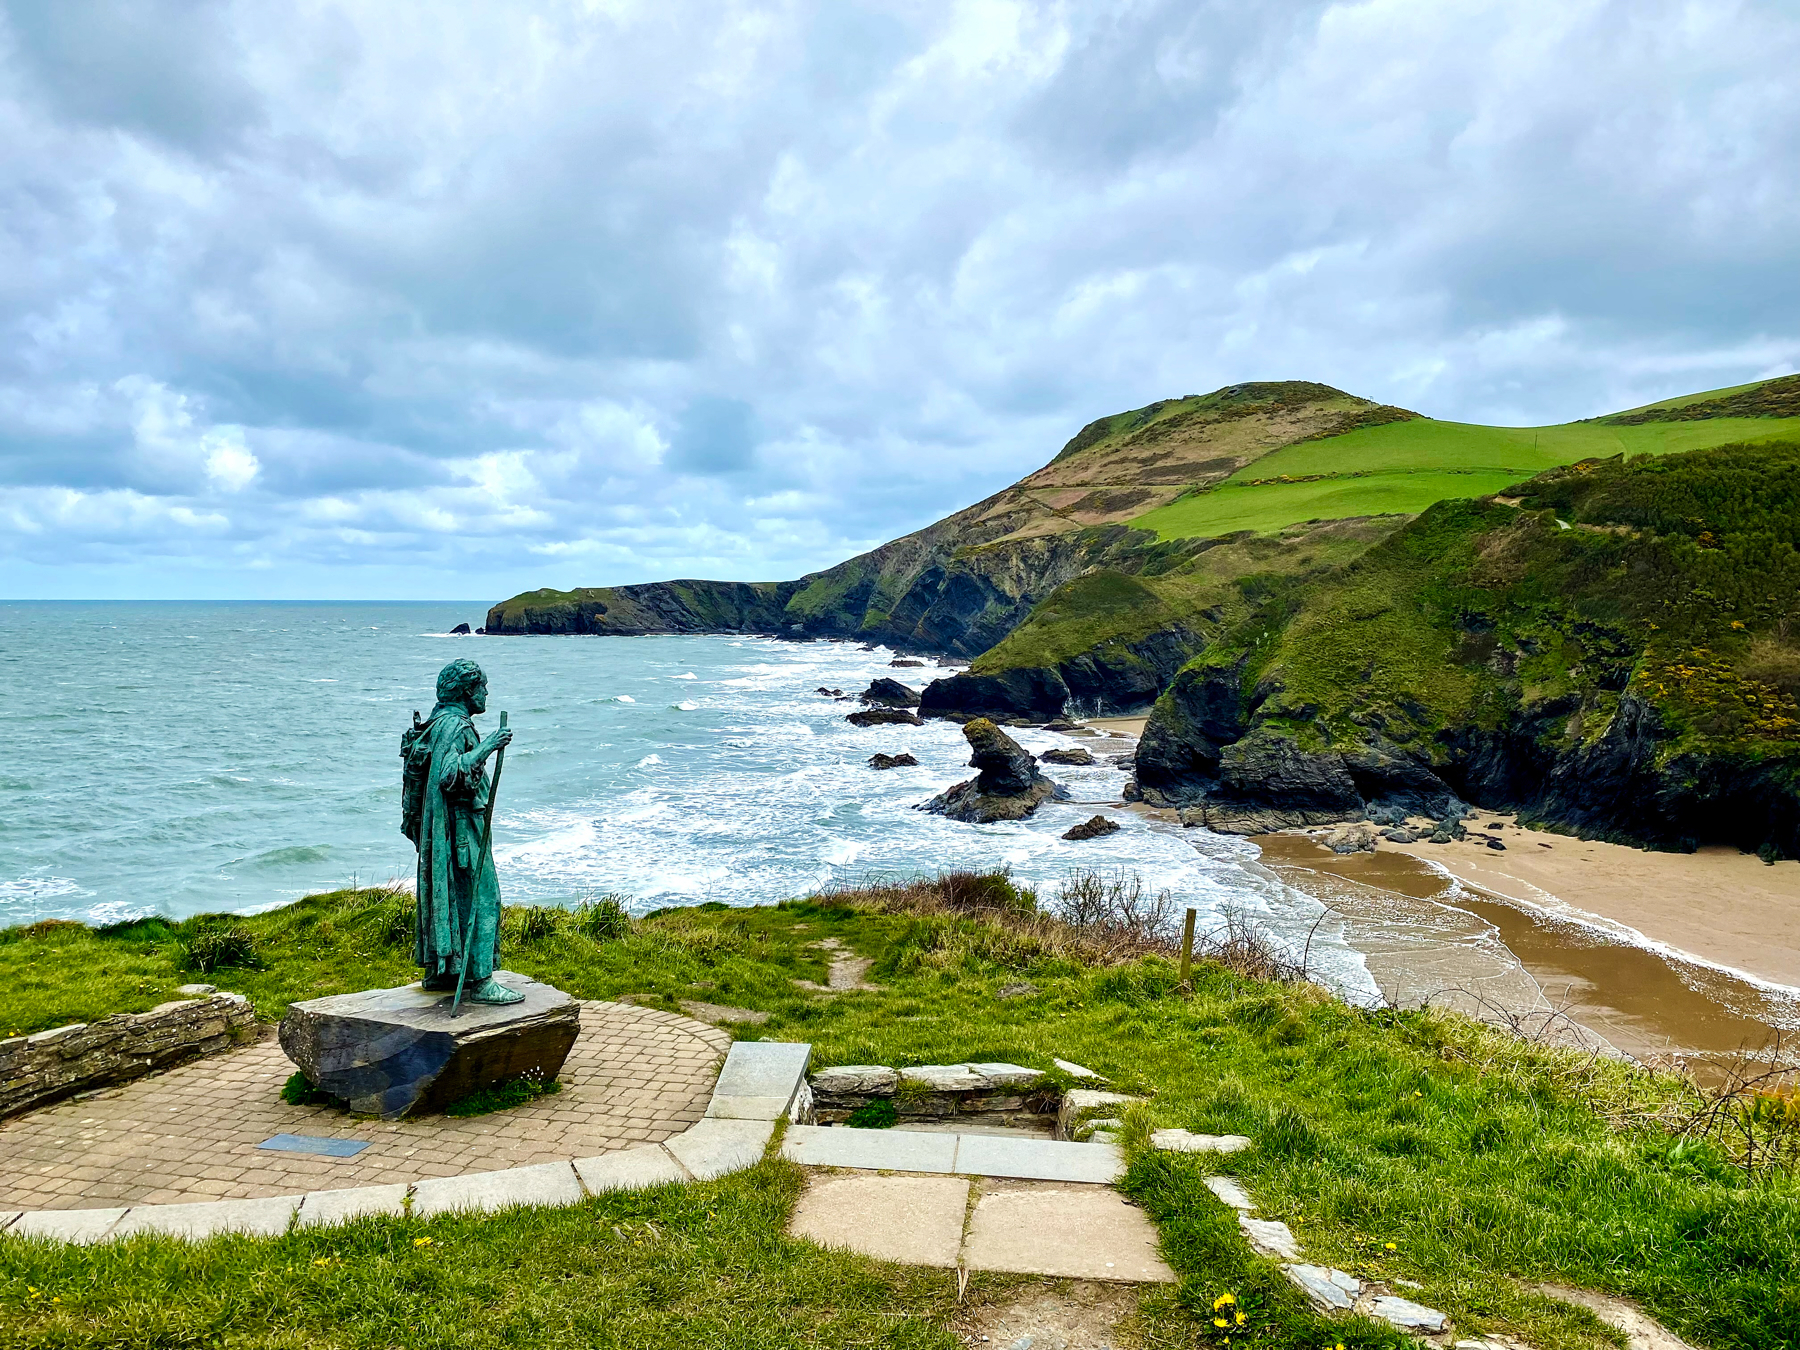 A bronze statue of a figure looking out to sea, standing on a cliff overlooking a rugged coastline with a sandy beach, rocky outcrops, and rolling green hills under a cloudy sky.